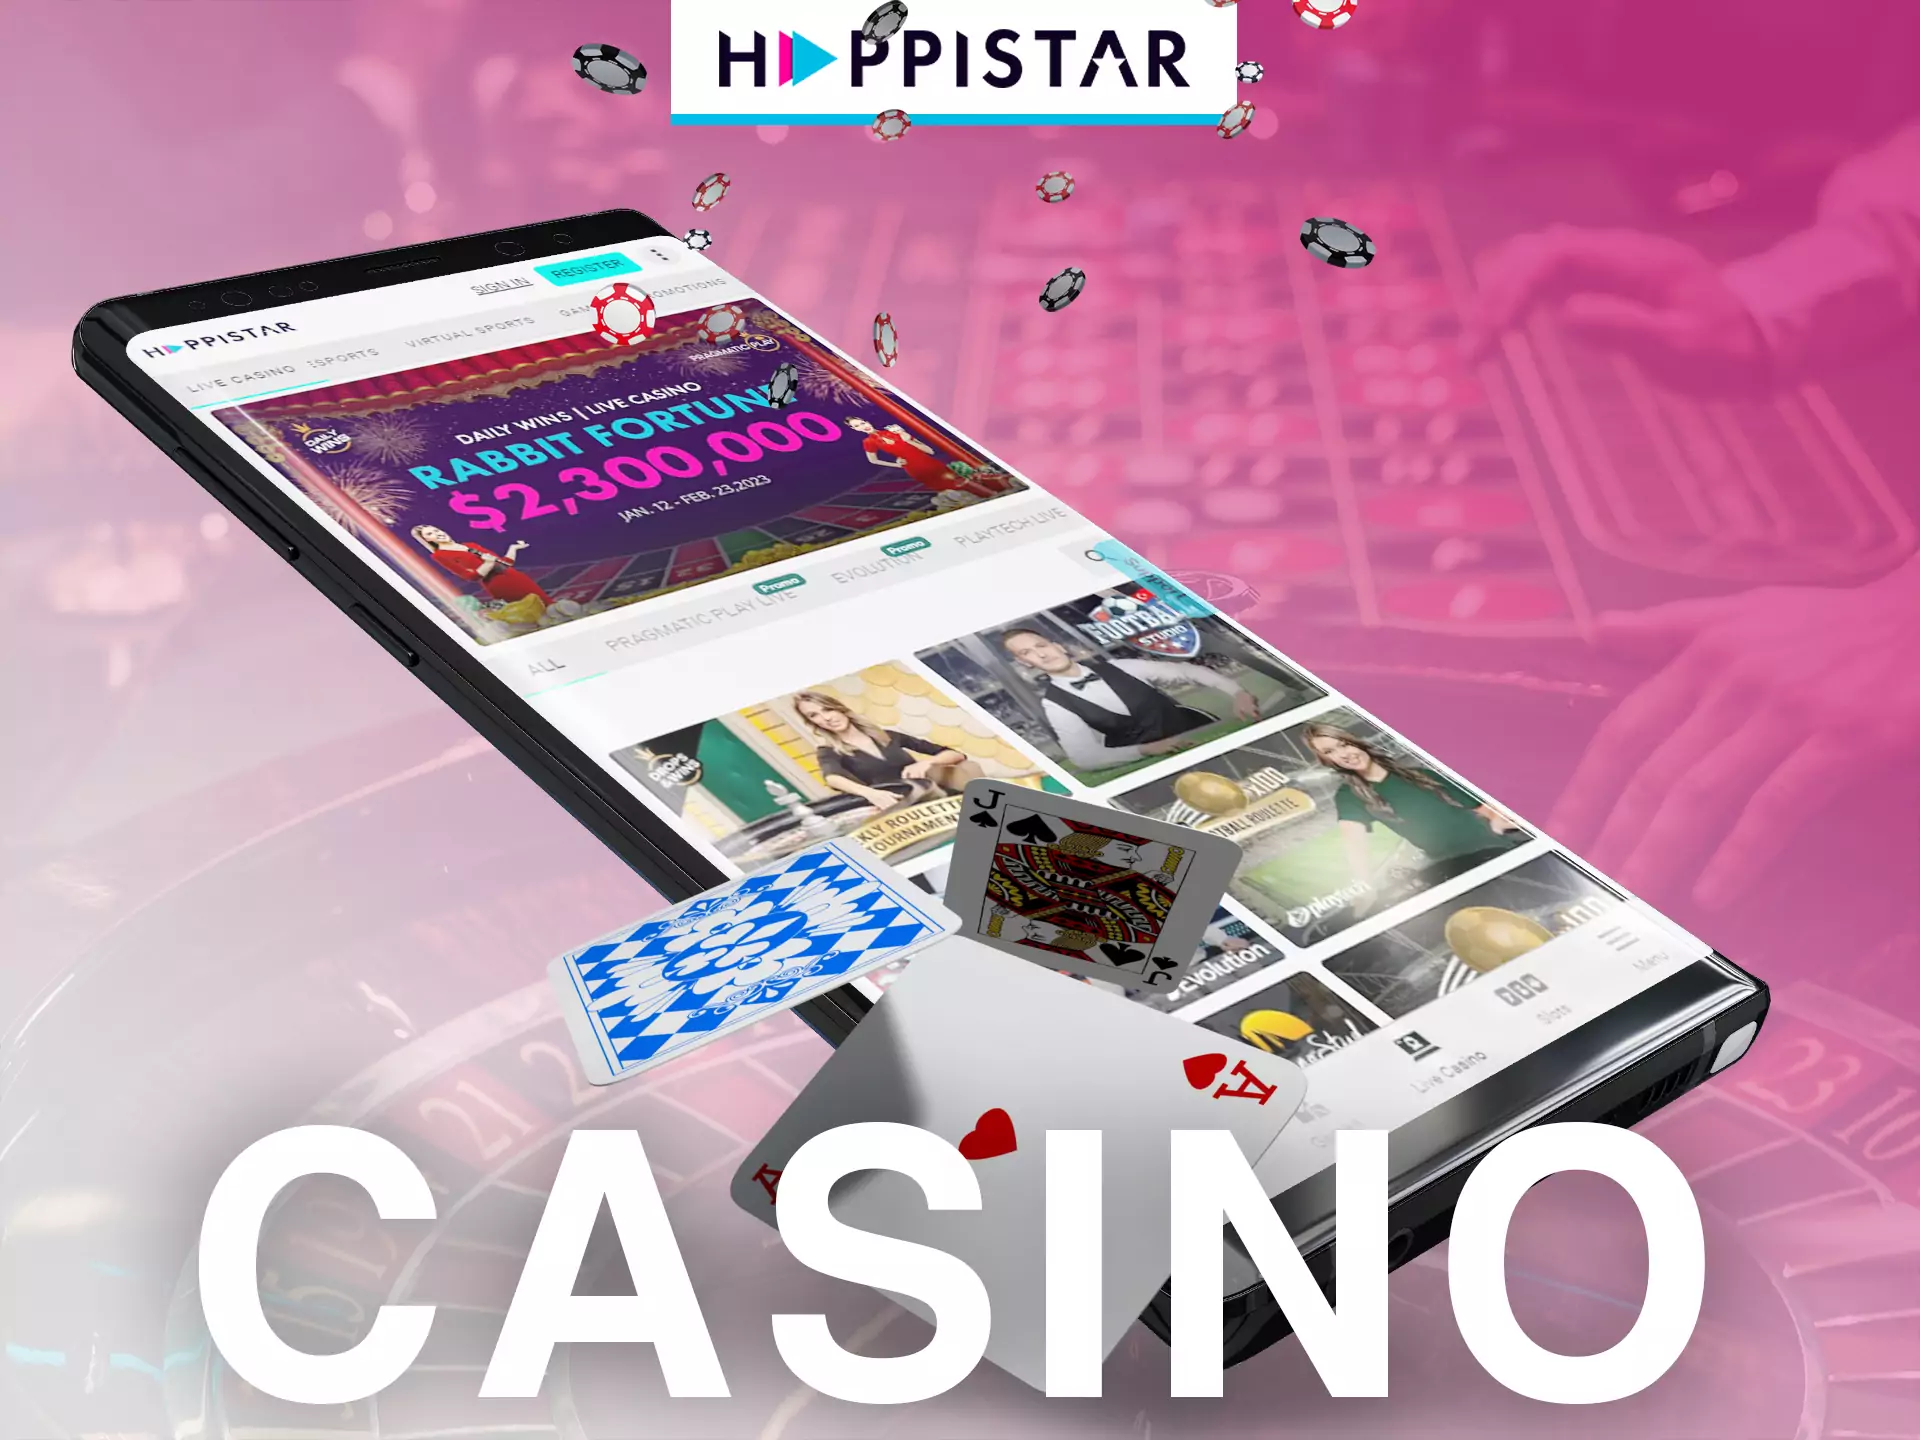 On Happistar, you can play online and live casino games.